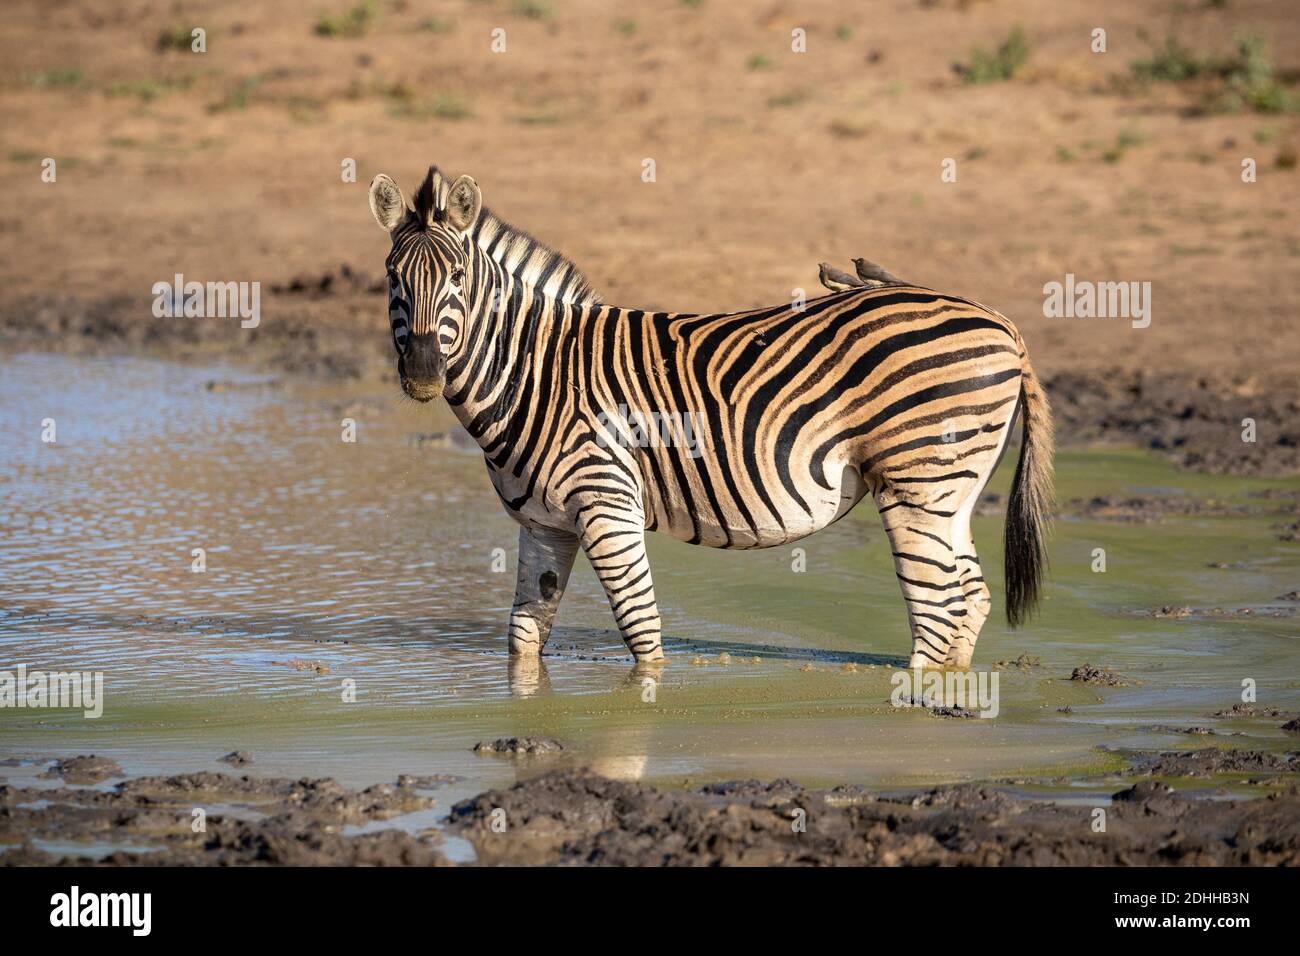 Adult zebra standing in muddy water looking alert in Kruger National Park in South Africa Stock Photo